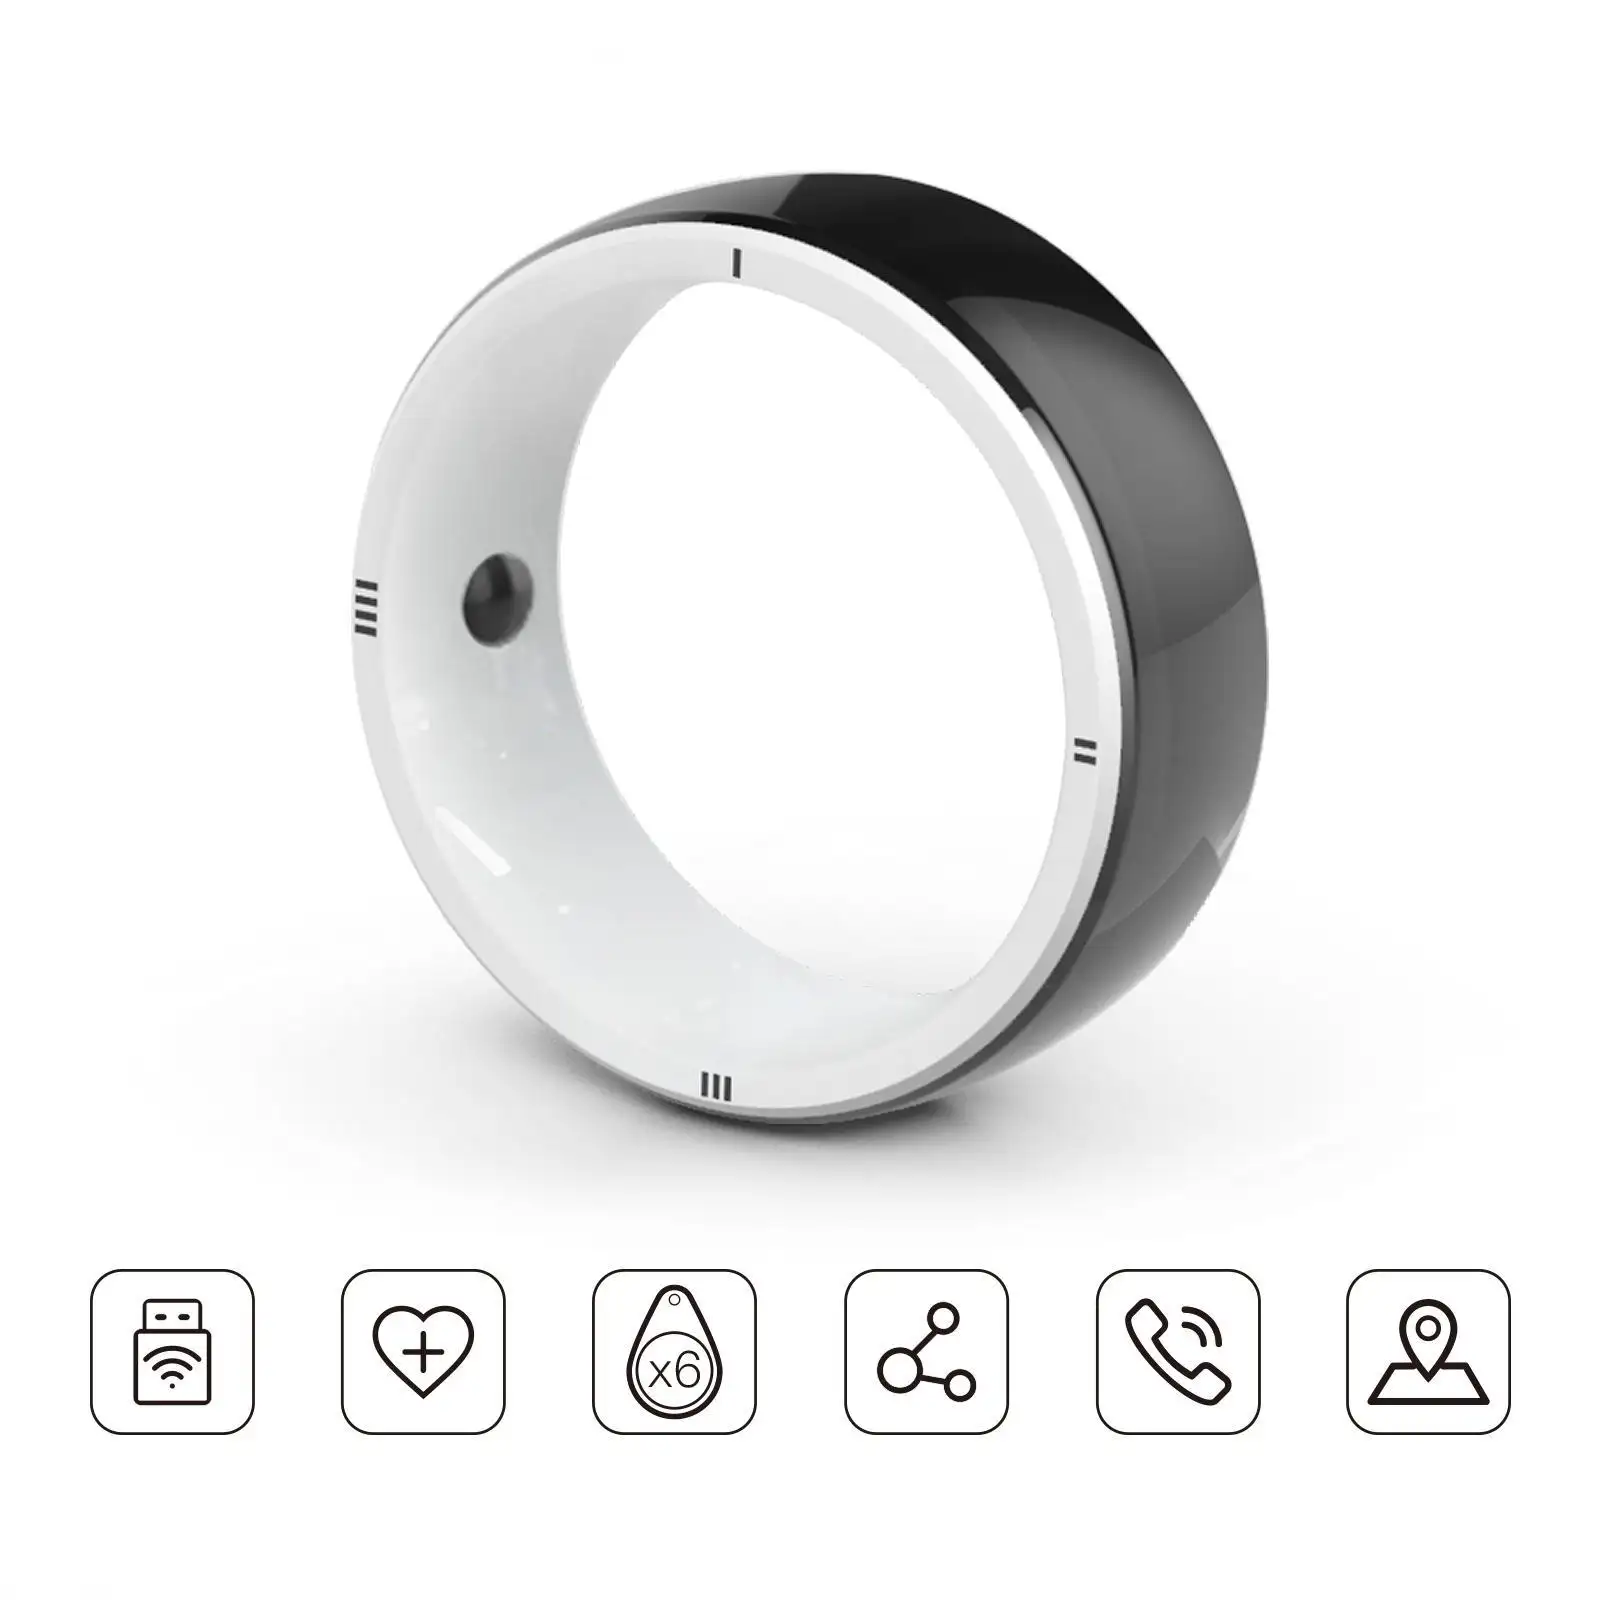 JAKCOM R5 Smart Ring New Smart Ring Best gift with touch mp4 bule film laptop cooling pad which smartwatch to buy handmade